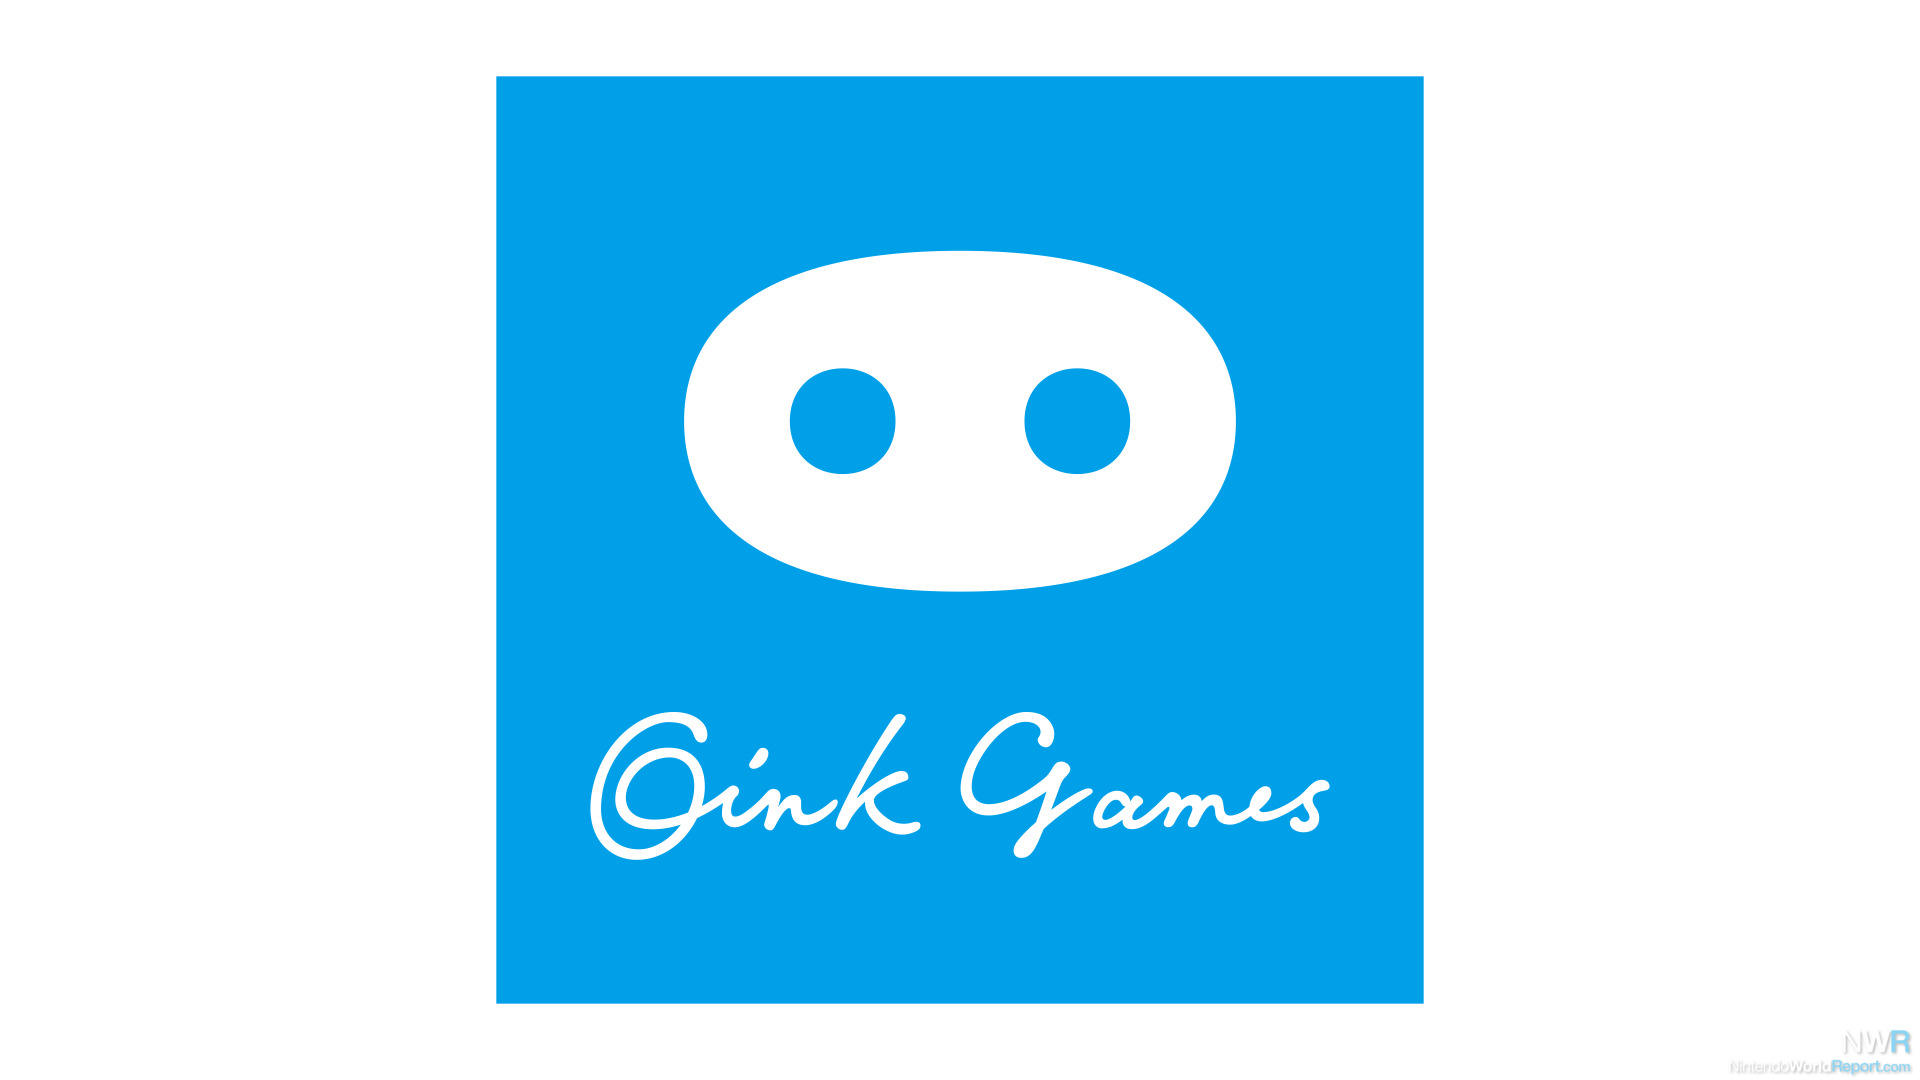 Let's Play! Oink Games - Oink Games